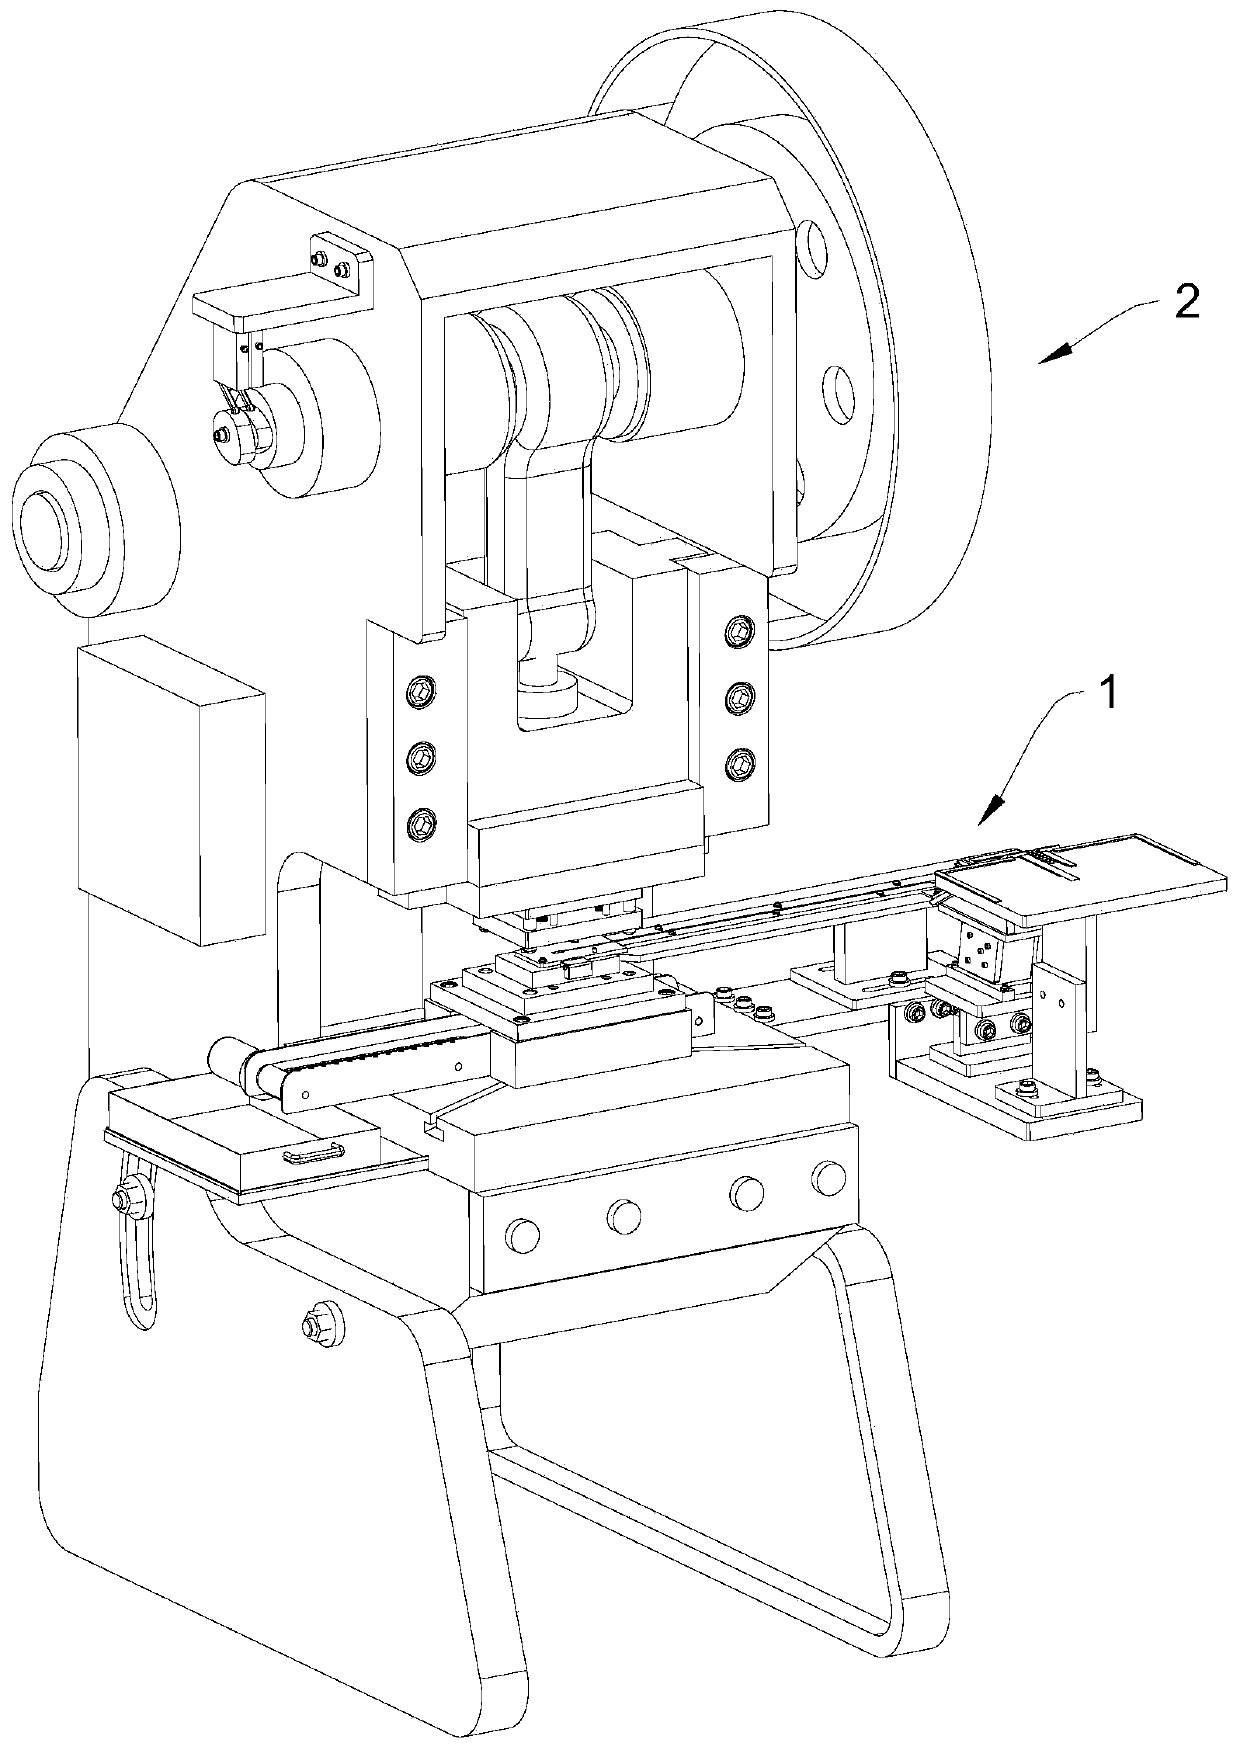 Semi-automatic stamping system